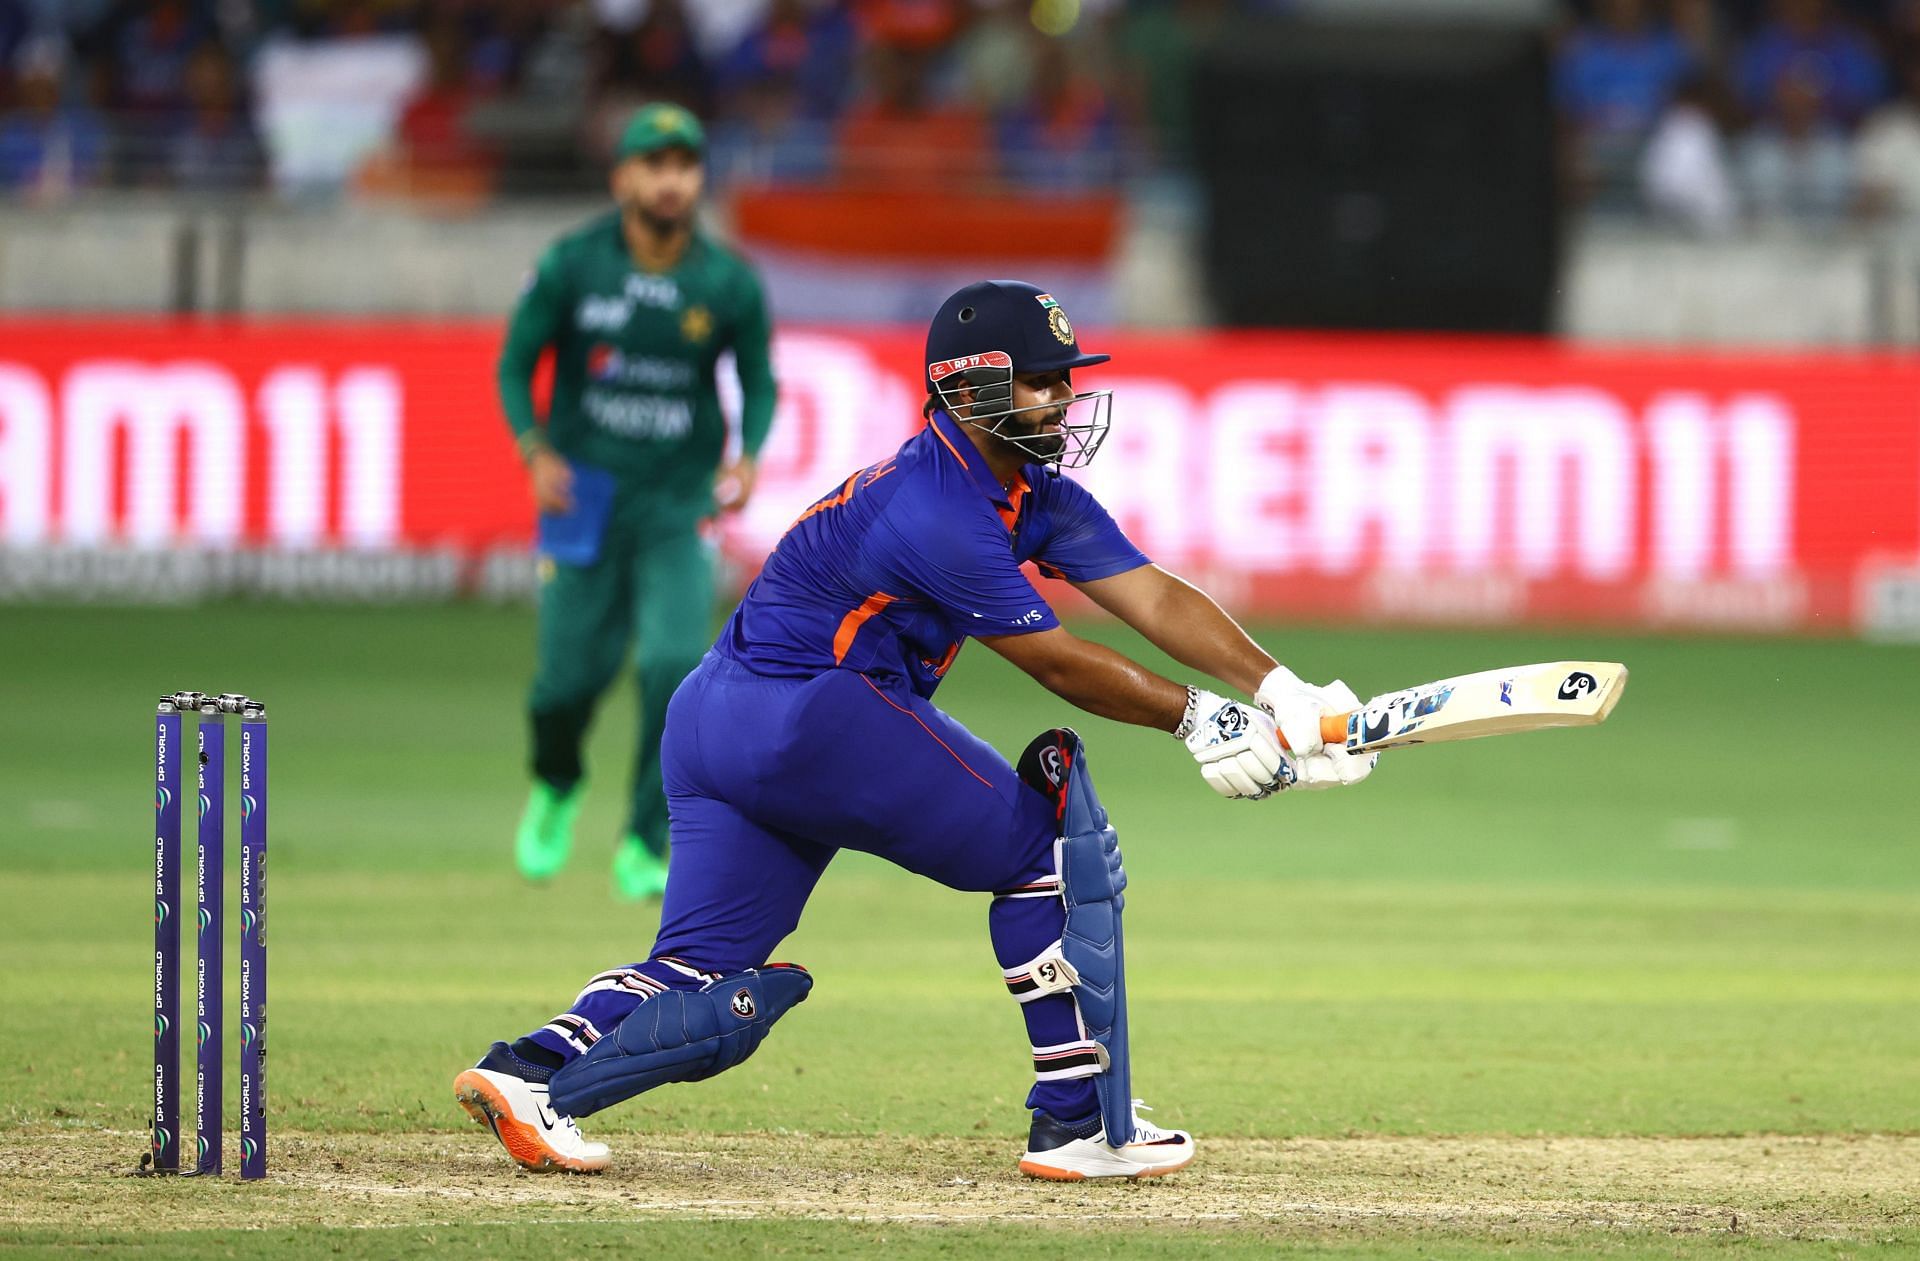 Rishabh Pant is one of the 15 players present in the Indian squad for the 2022 T20 World Cup (Image: Getty)